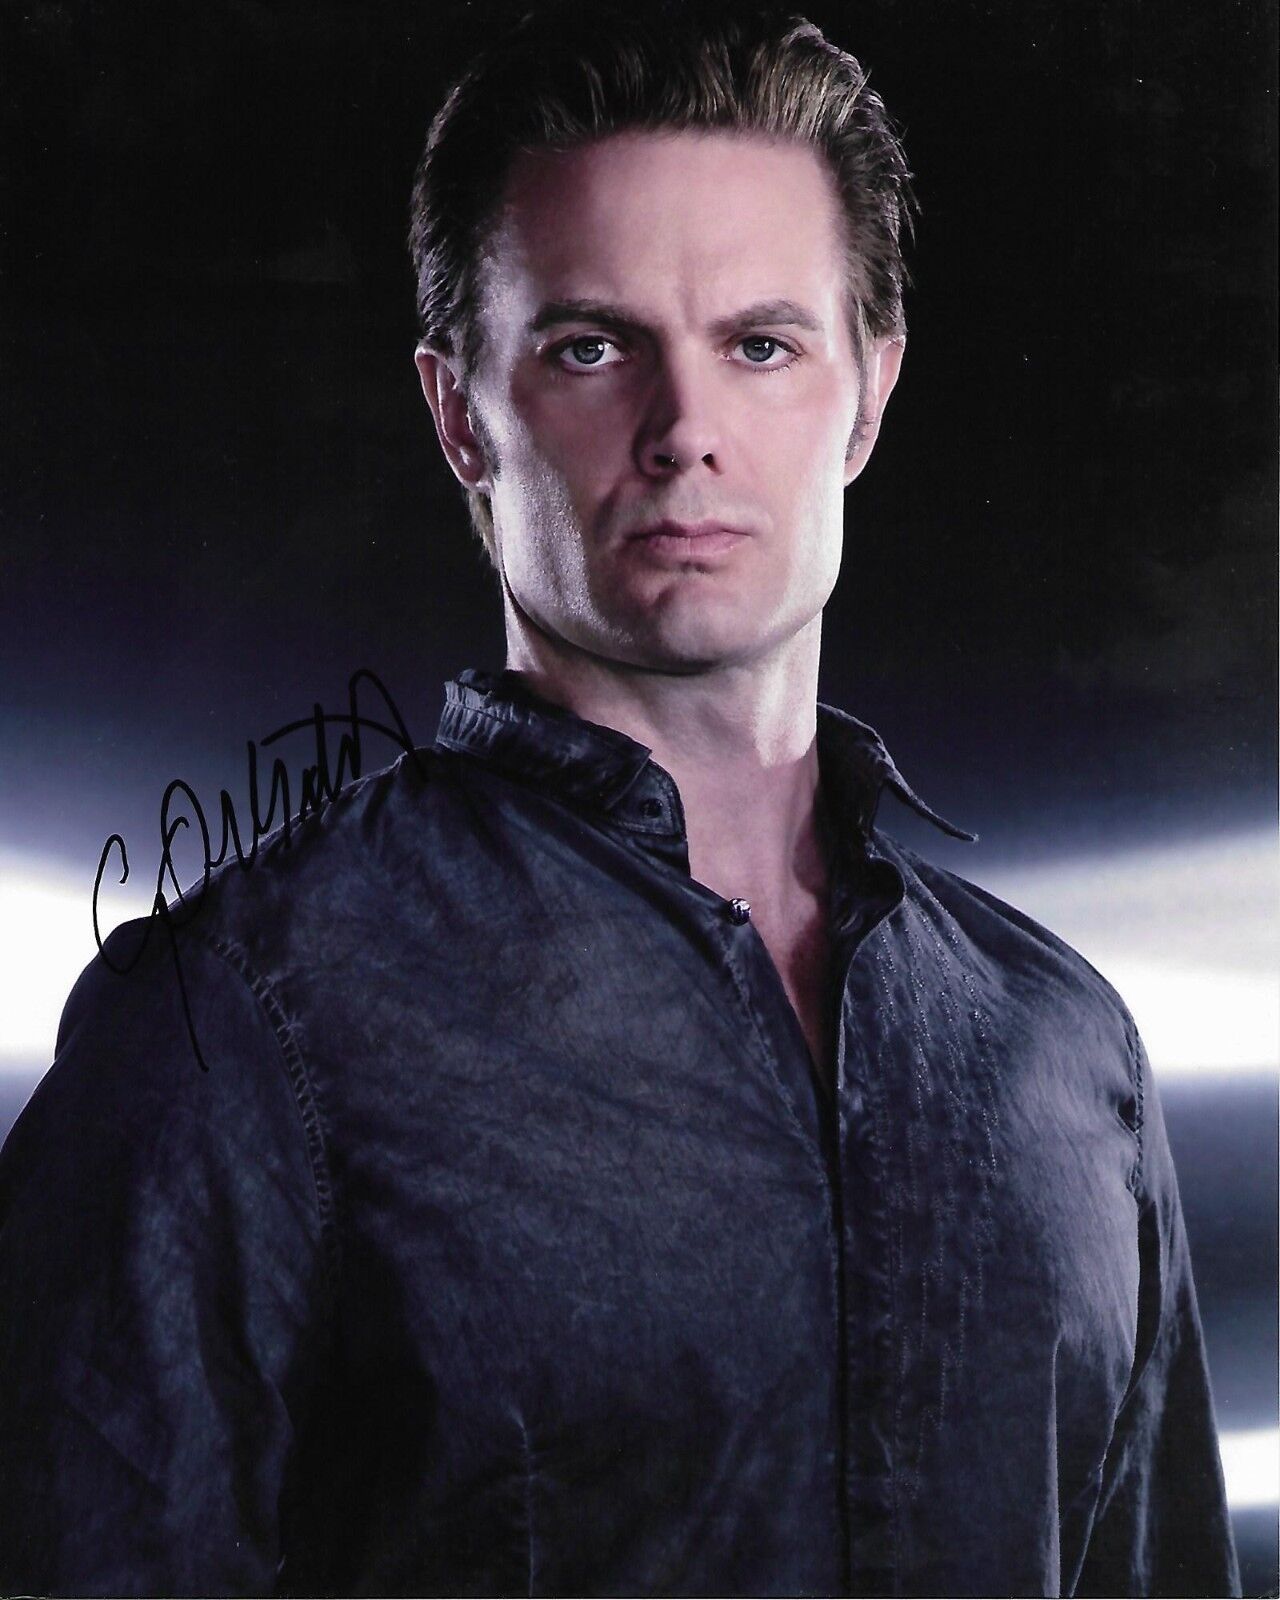 GARRET DILLAHUNT TERMINATOR SHOW AUTOGRAPHED Photo Poster painting SIGNED 8X10 #1 CROMARTIE